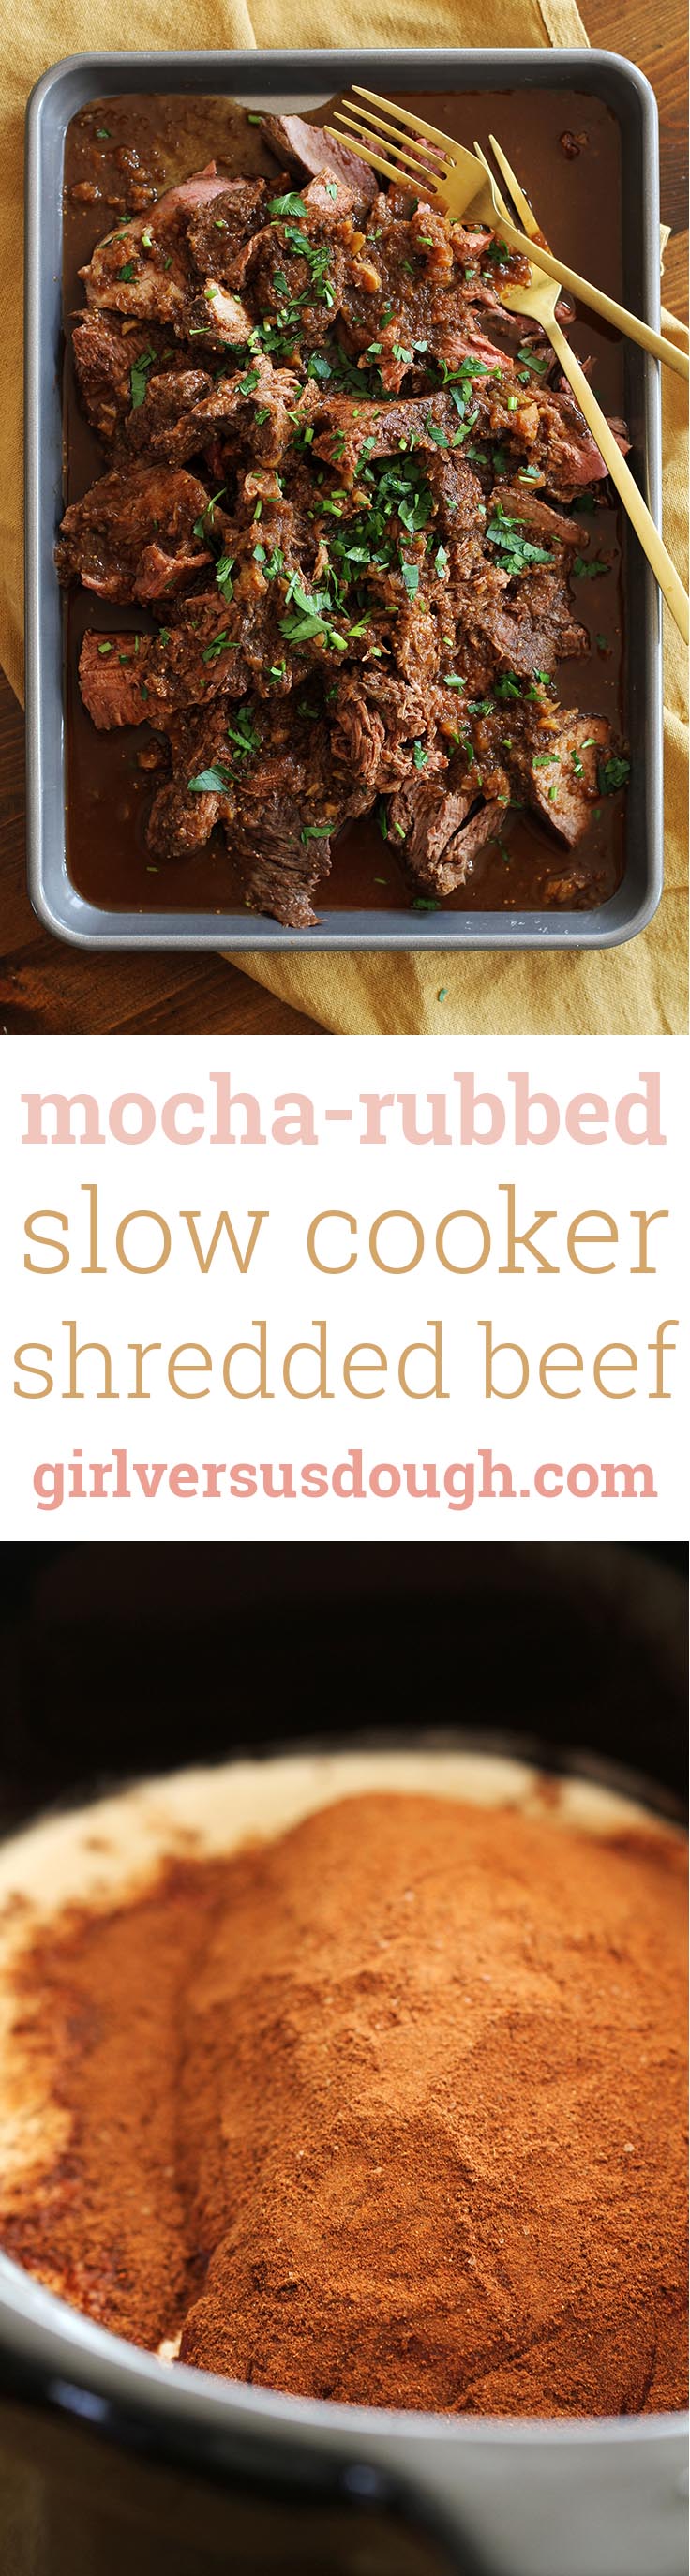 Mocha Rubbed Slow Cooker Shredded Beef -- Espresso and cocoa come together in this delicious, tender crockpot pot roast. girlversusdough.com @girlversusdough